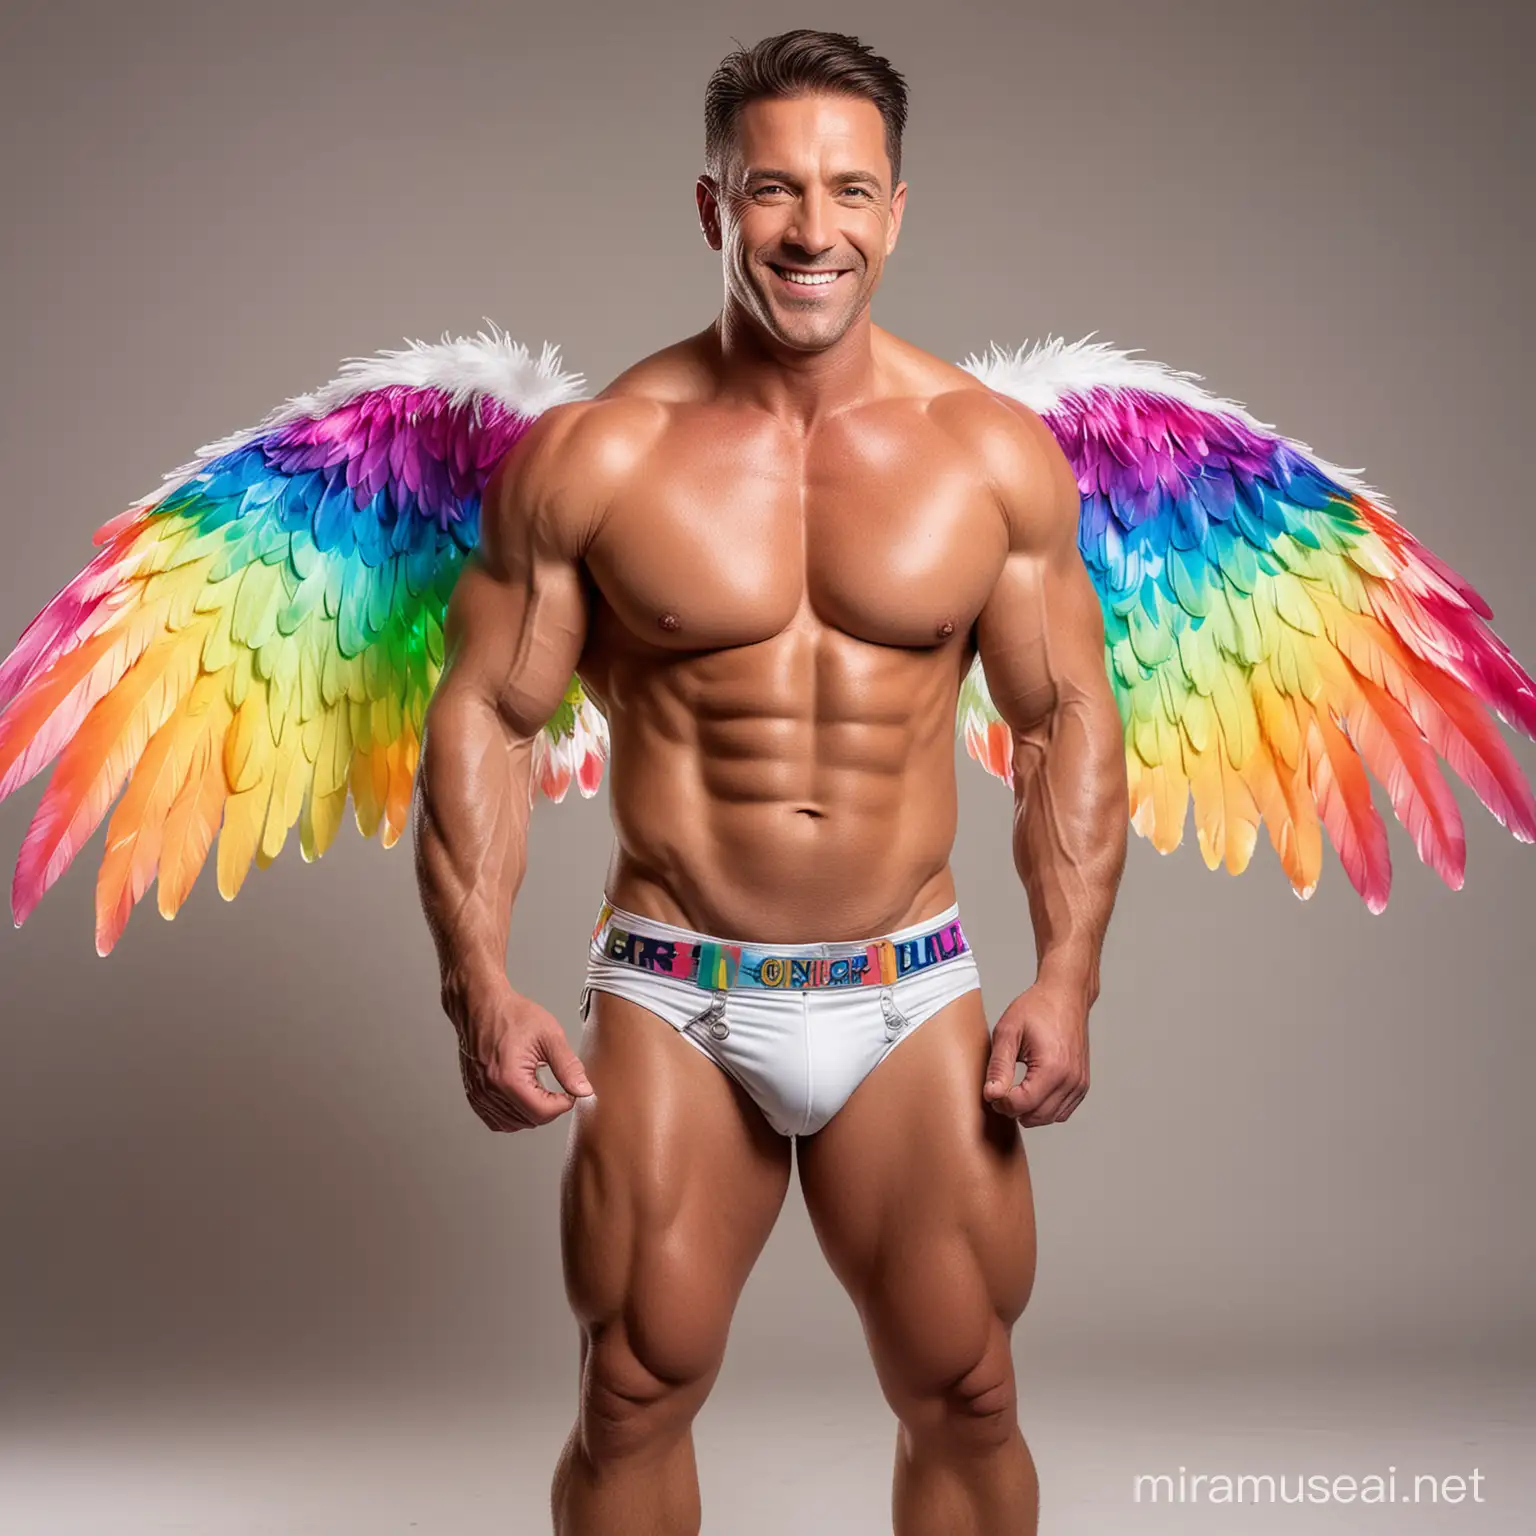 Colorful Fitness Inspiration Smiling Bodybuilder with Rainbow Eagle Wings and LED Jacket